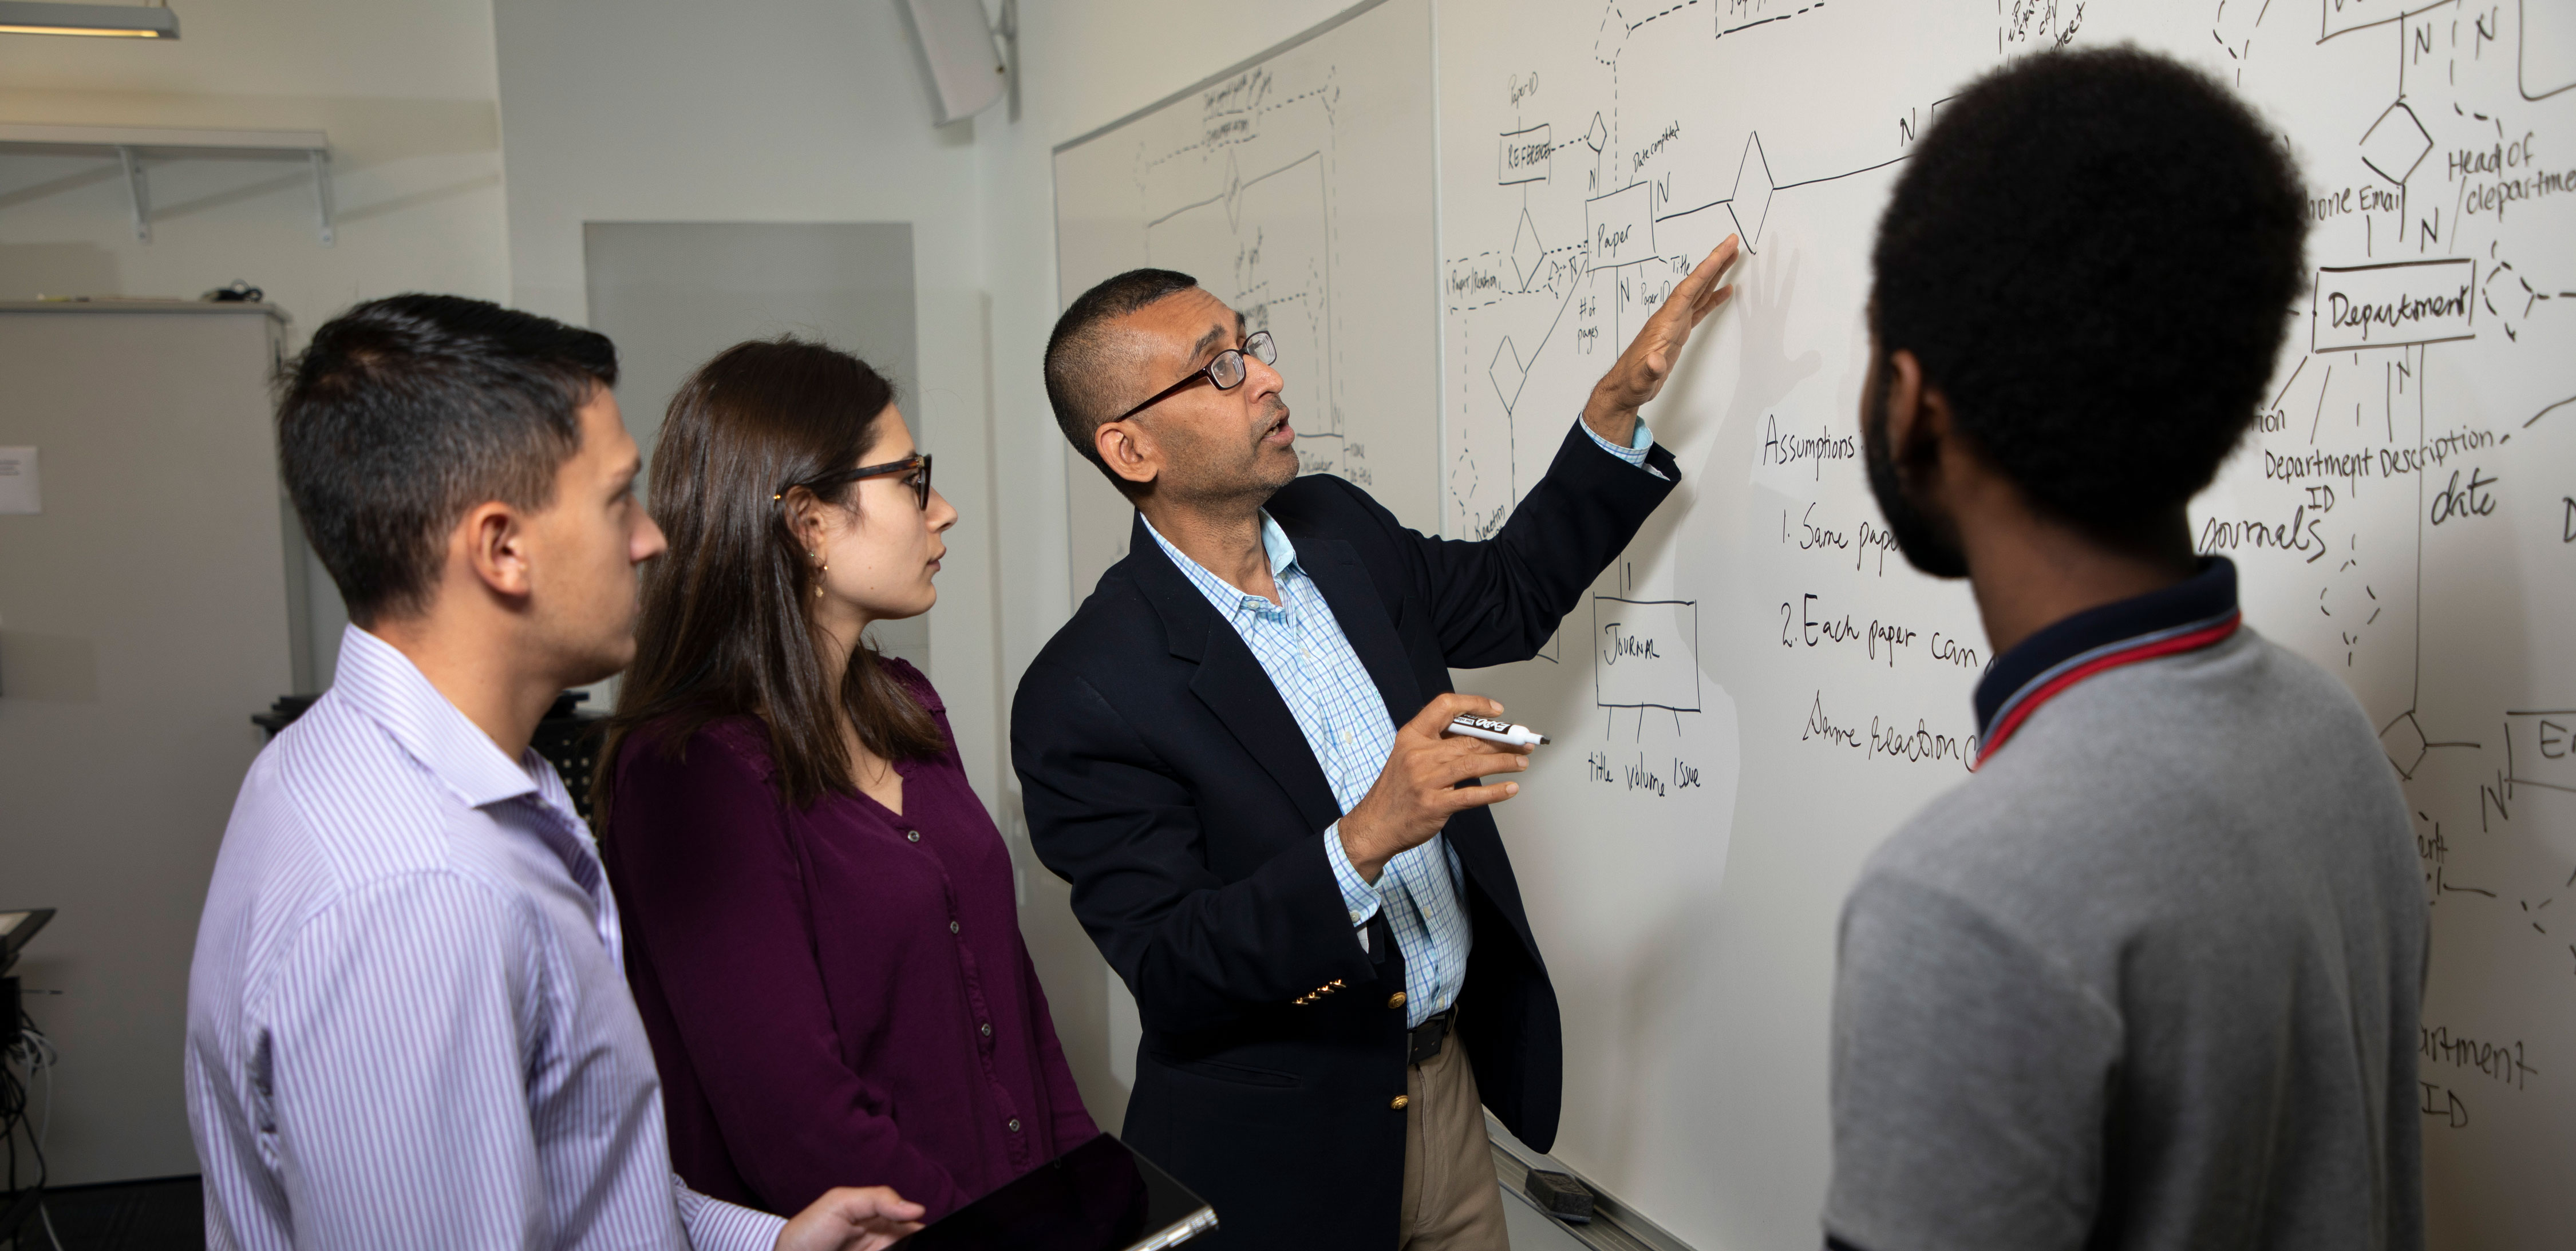 An instructor standing with three students gestures toward and writes on a white board.